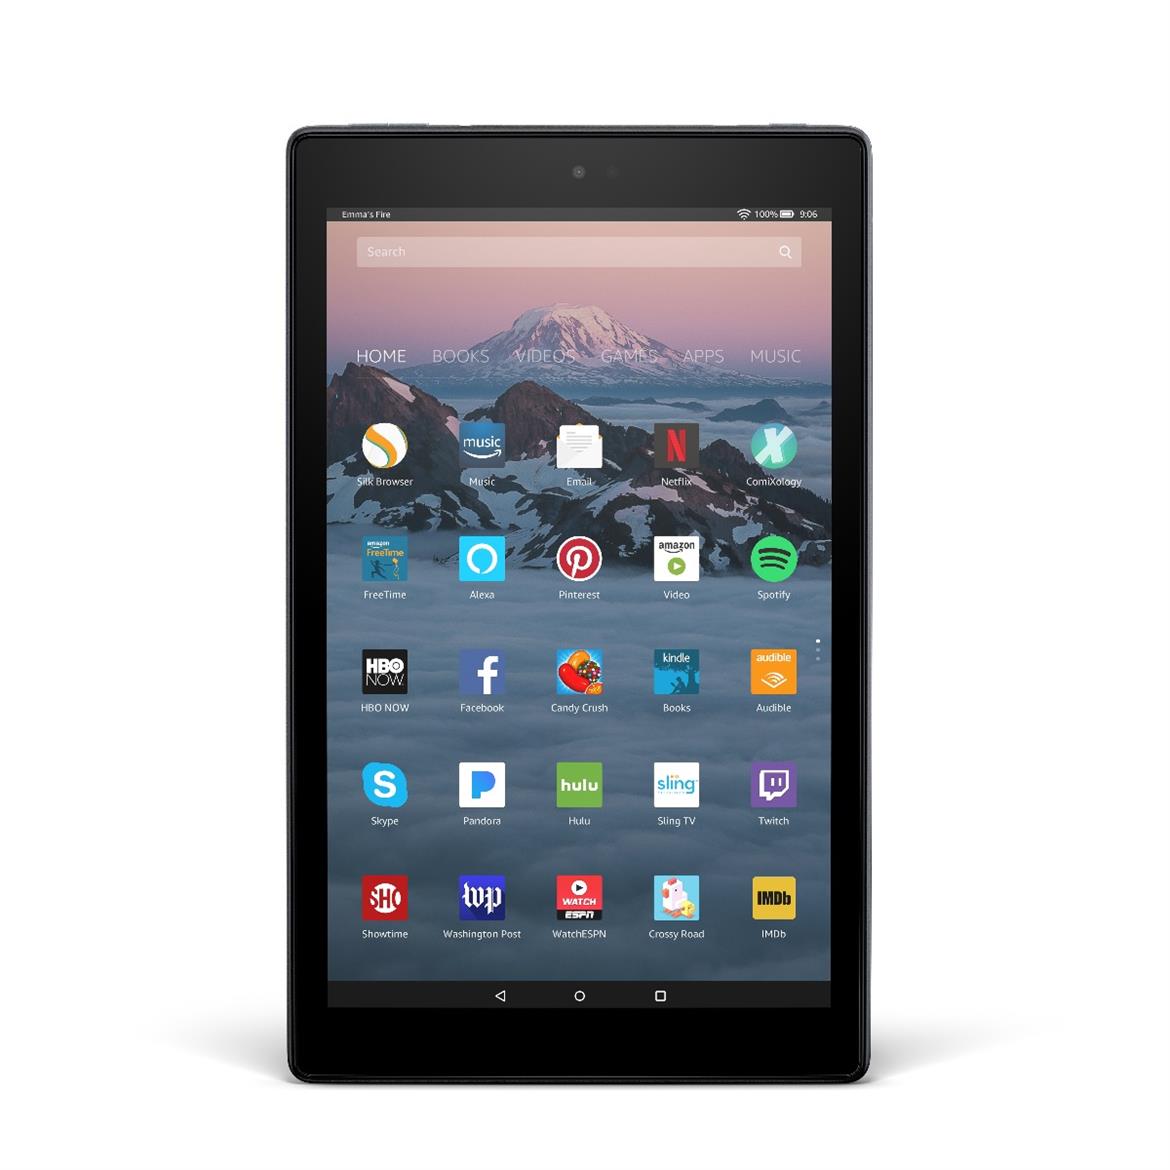 Amazon Fire HD 10 Tablet Upgraded With Hands-Free Alexa, Full HD Display, Lower Pricing